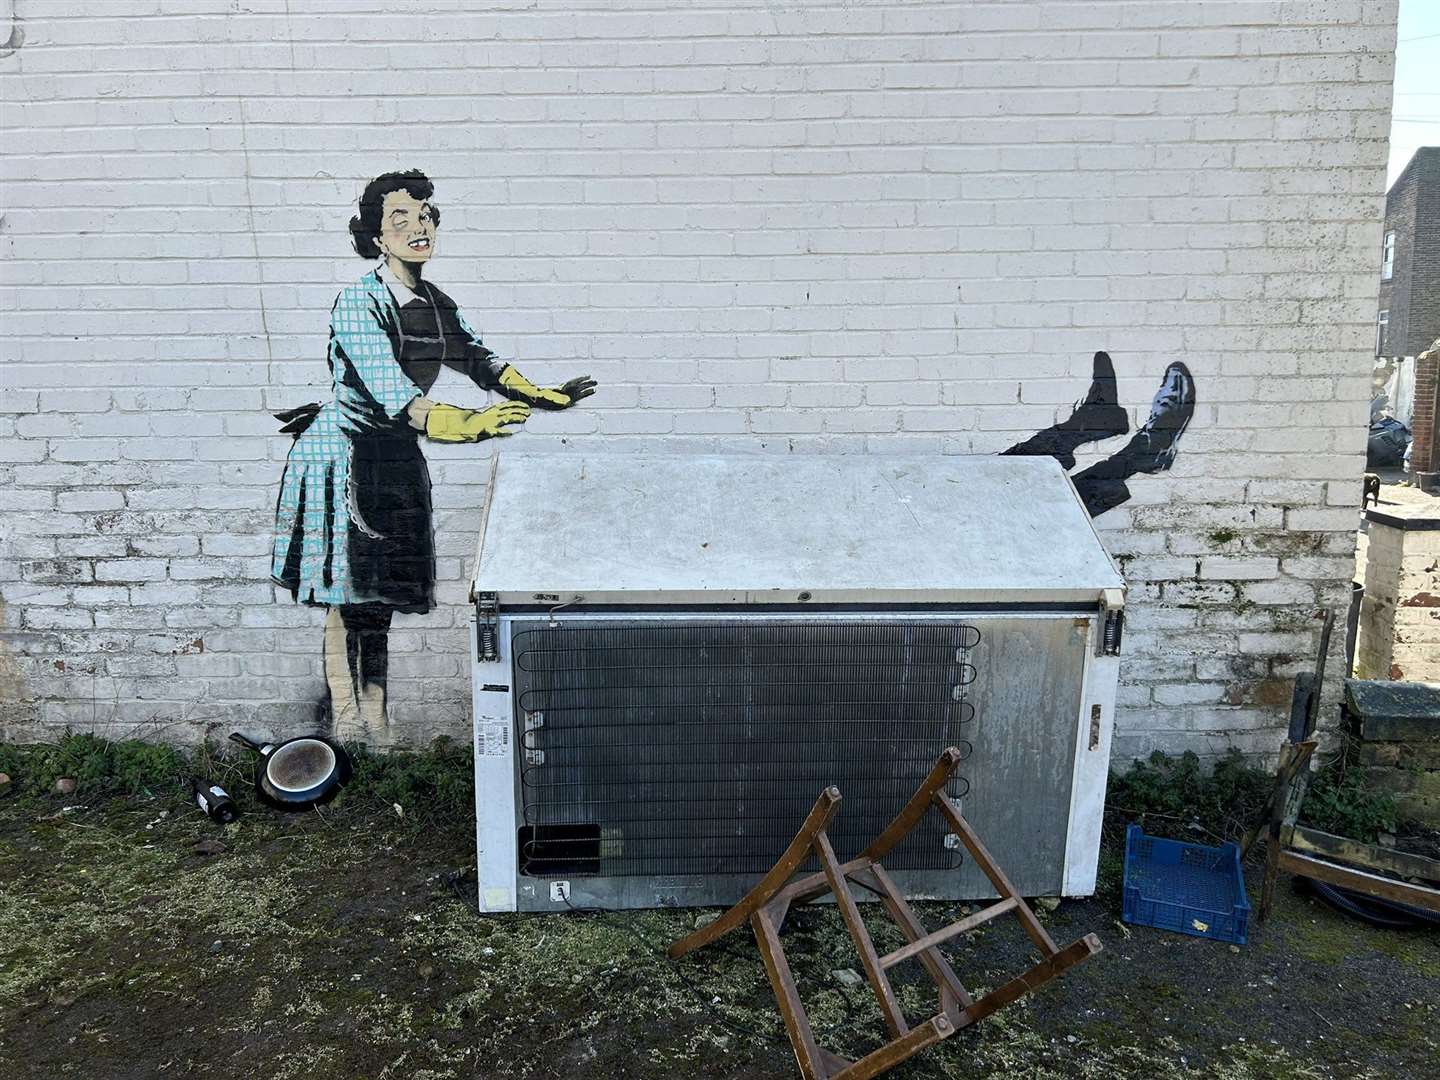 Thanet District Council removing the chest freezer from the Banksy artwork in Margate. Picture: Dan Bambridge-Higgins